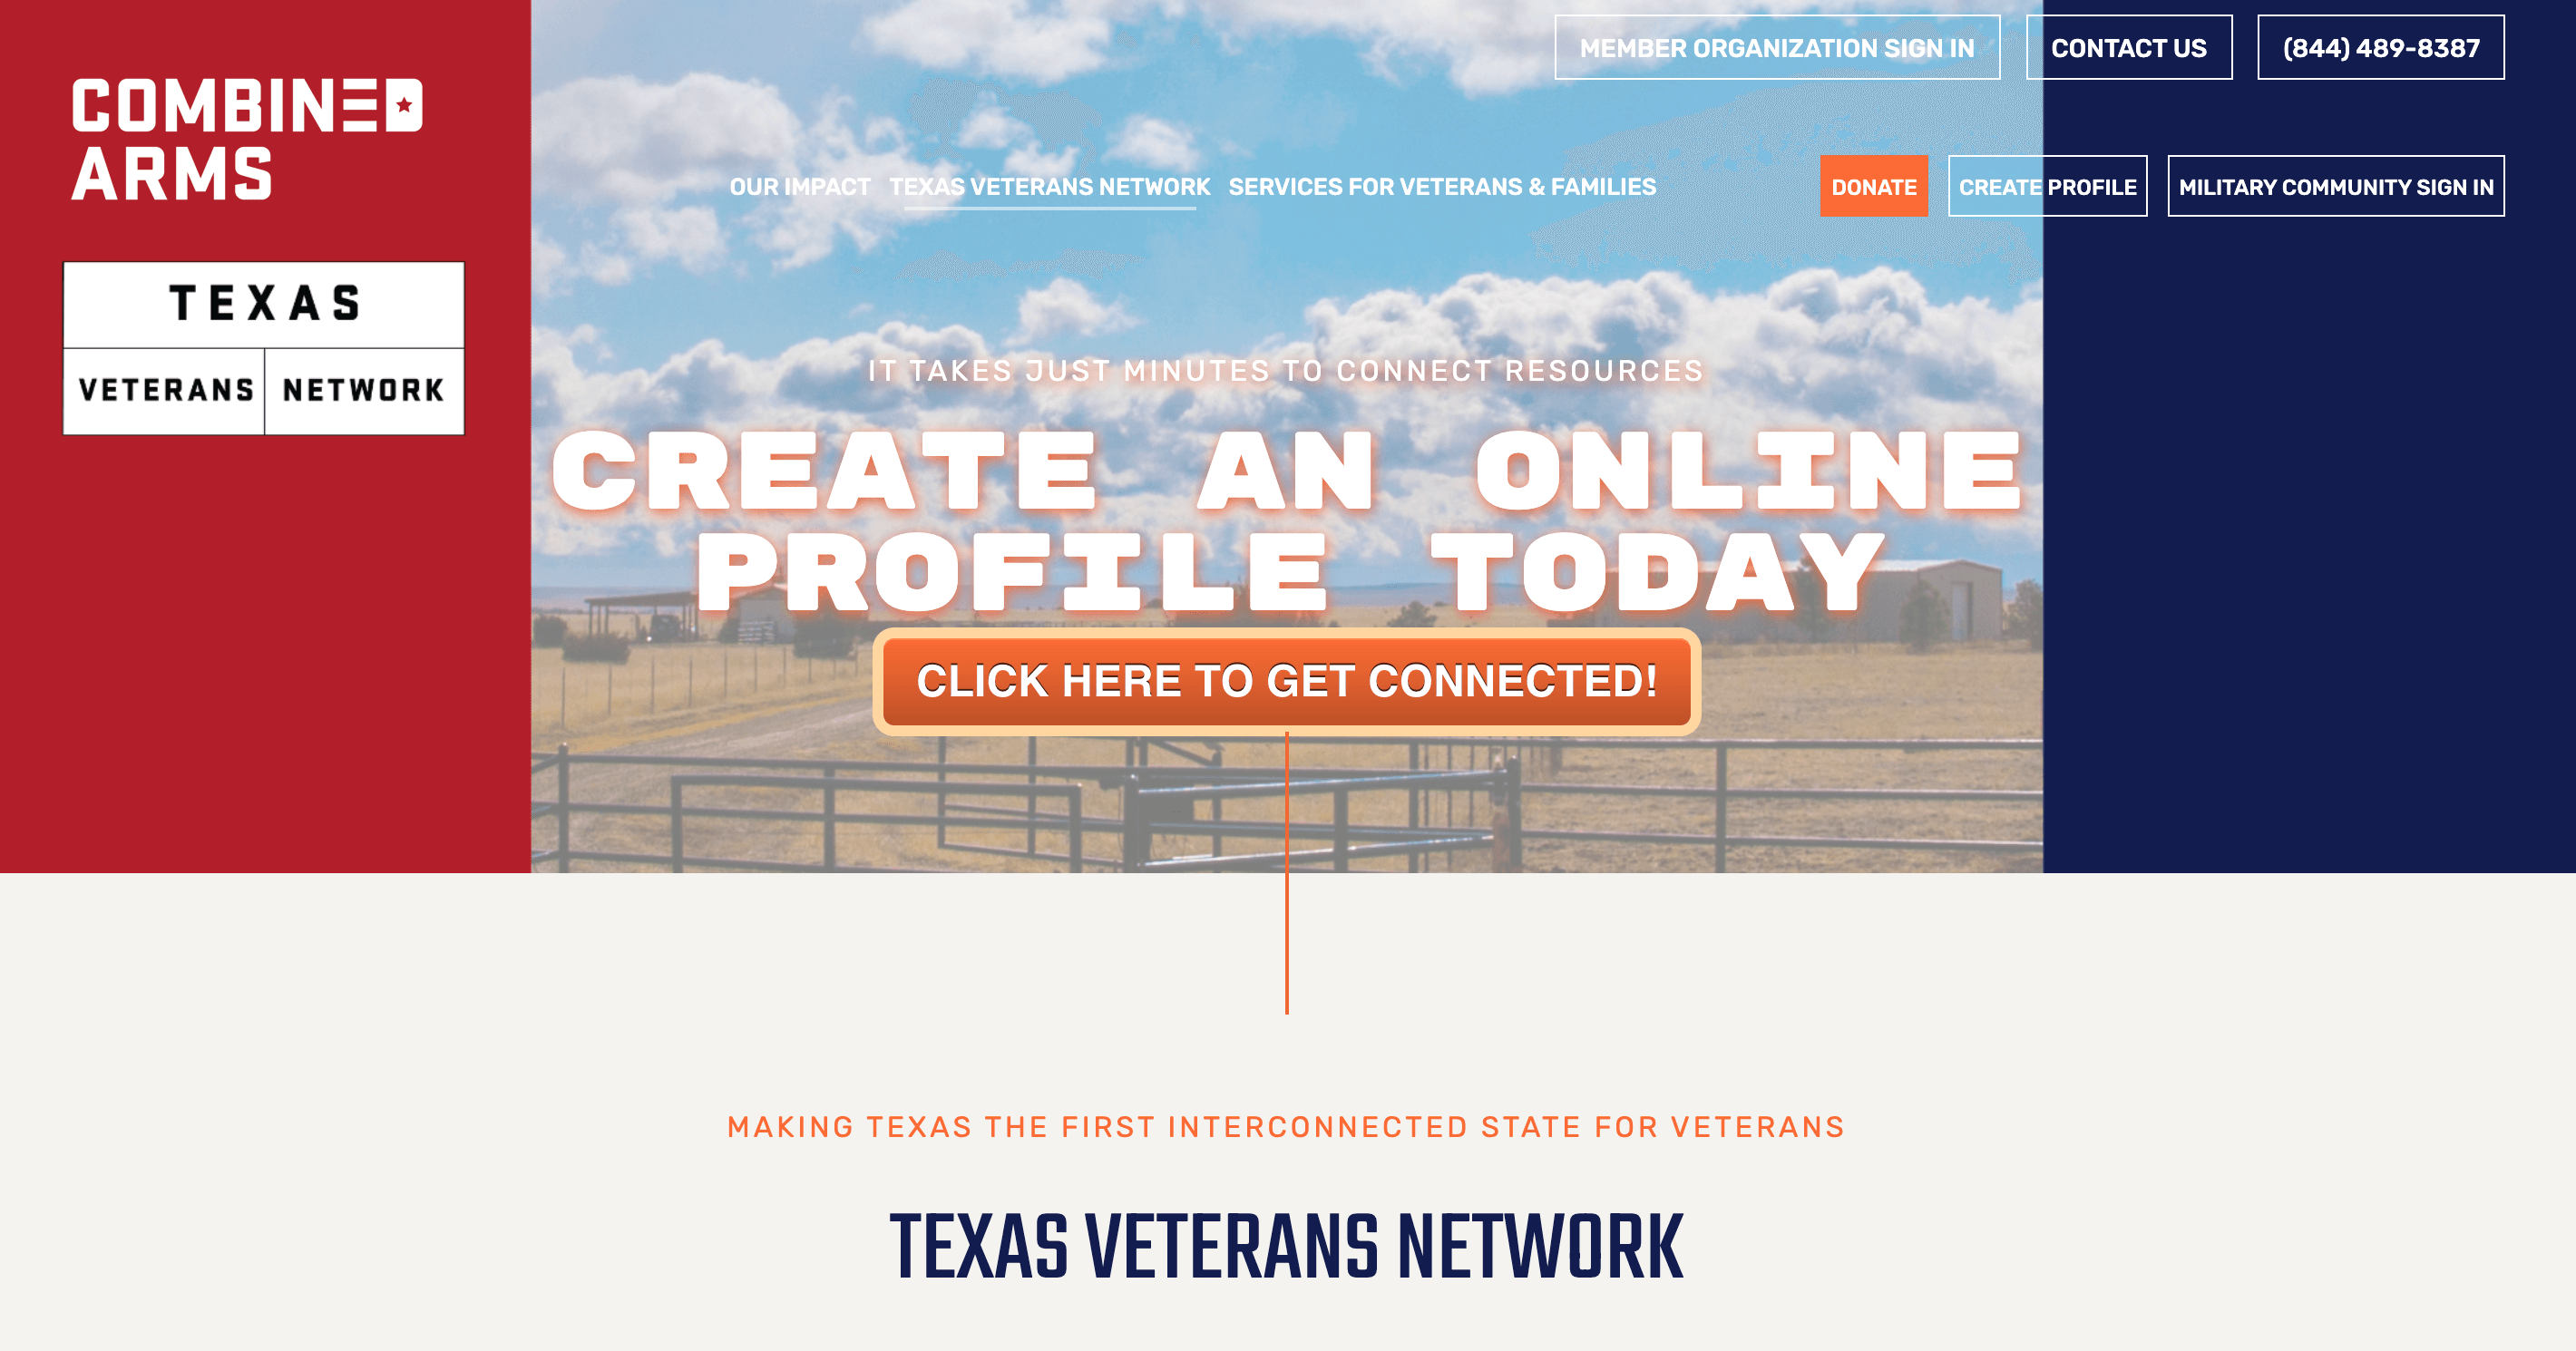 Combined Arms and the Texas Veterans Network